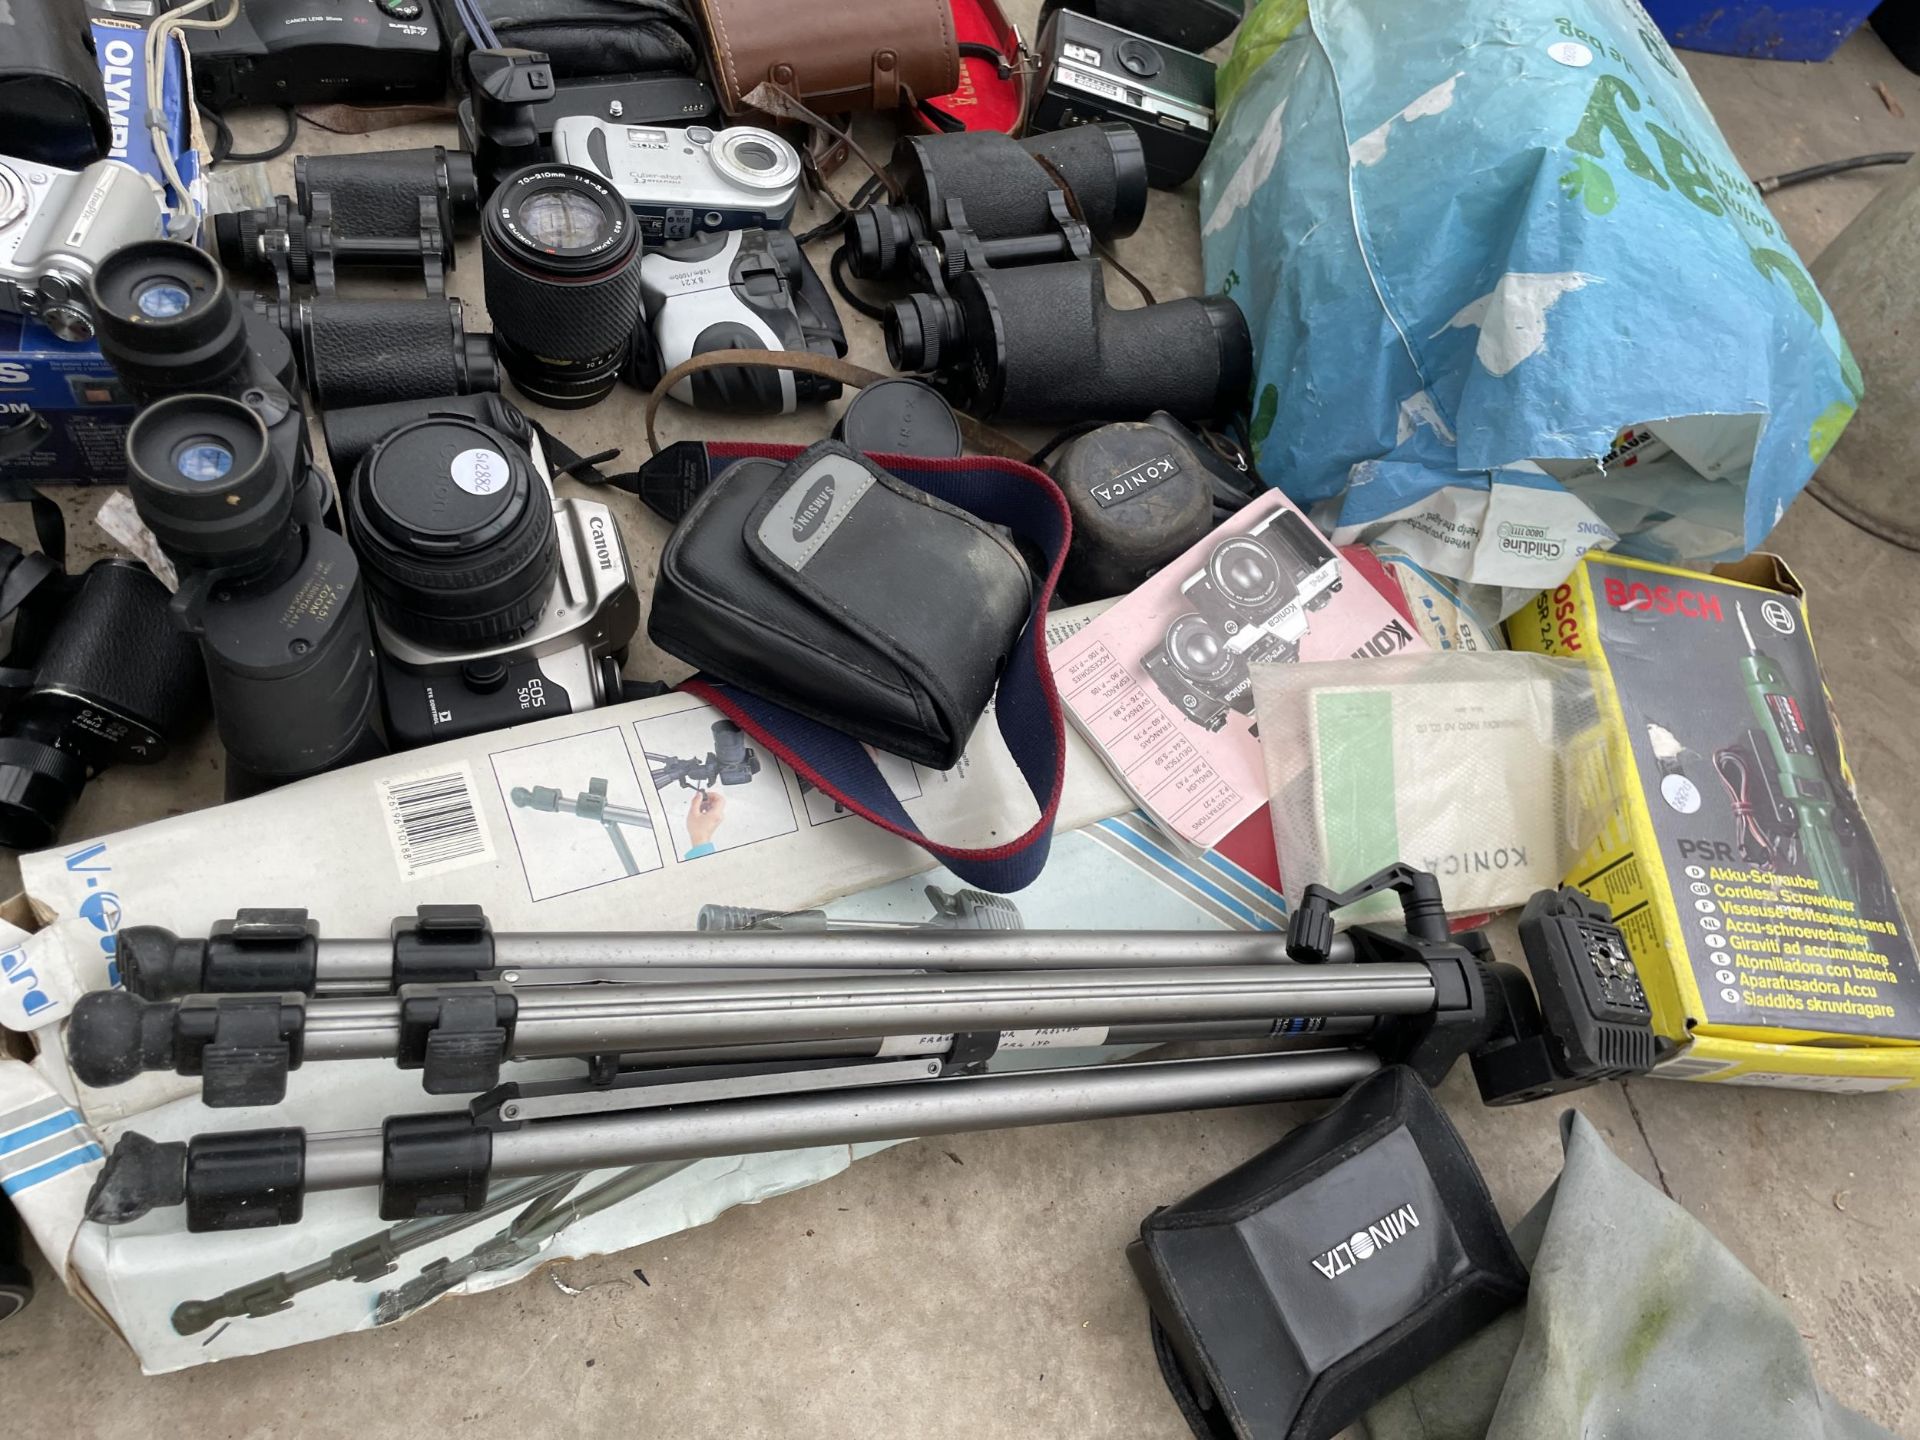 A LARGE ASSORTMENT OF PHOTOGRAPHY EQUIPMENT TO INCLUDE CAMERAS, LENS', BINOCULARS AND A TRIPOD STAND - Image 5 of 5